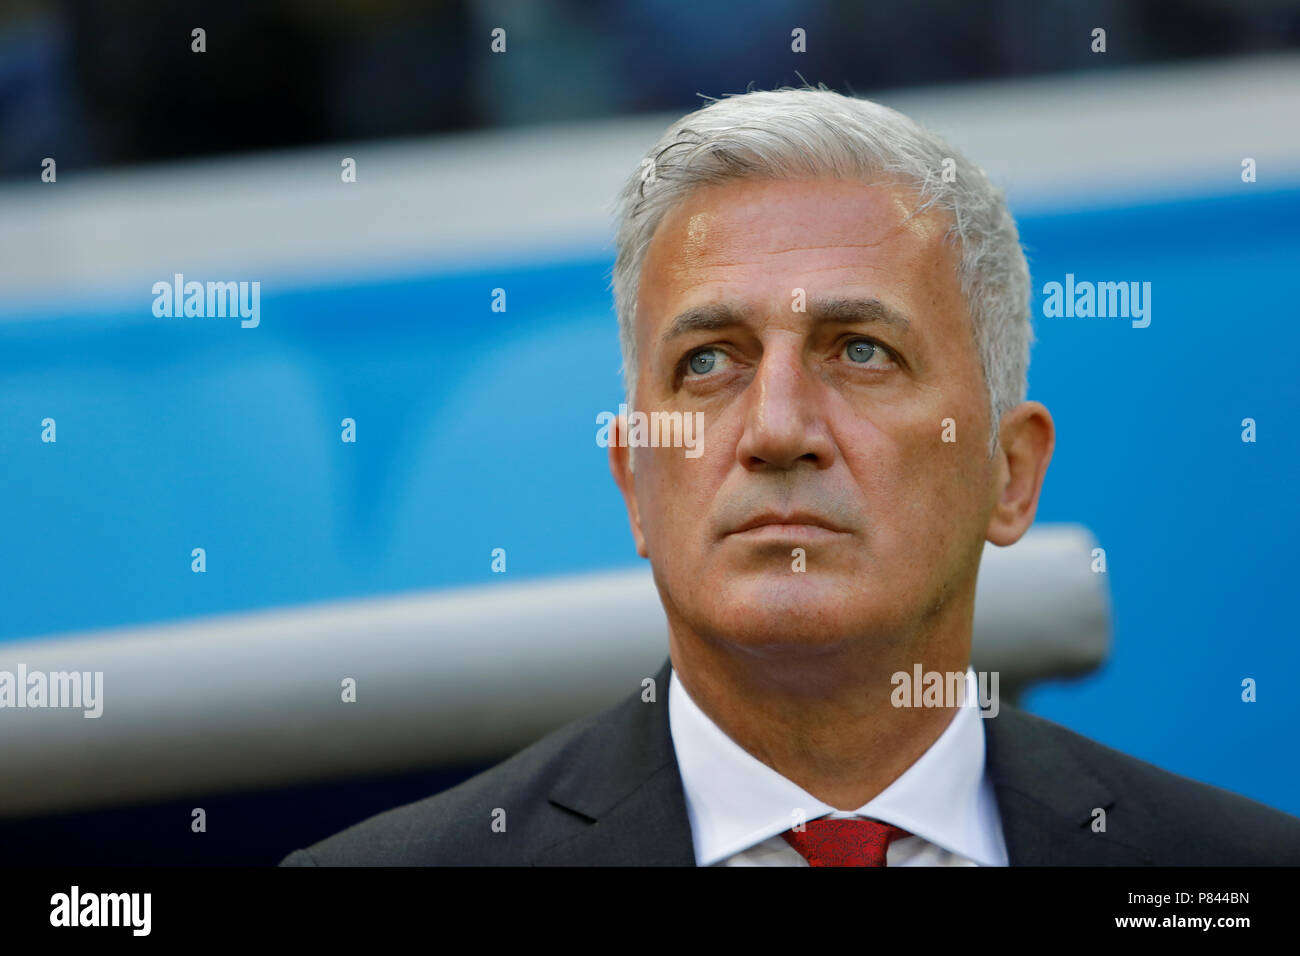 SAINT PETERSBURG, RUSSIA - JULY 3: Switzerland national team head coach Vladimir Petkovic looks on during the 2018 FIFA World Cup Russia Round of 16 match between Sweden and Switzerland at Saint Petersburg Stadium on July 3, 2018 in Saint Petersburg, Russia. (MB Media) Stock Photo